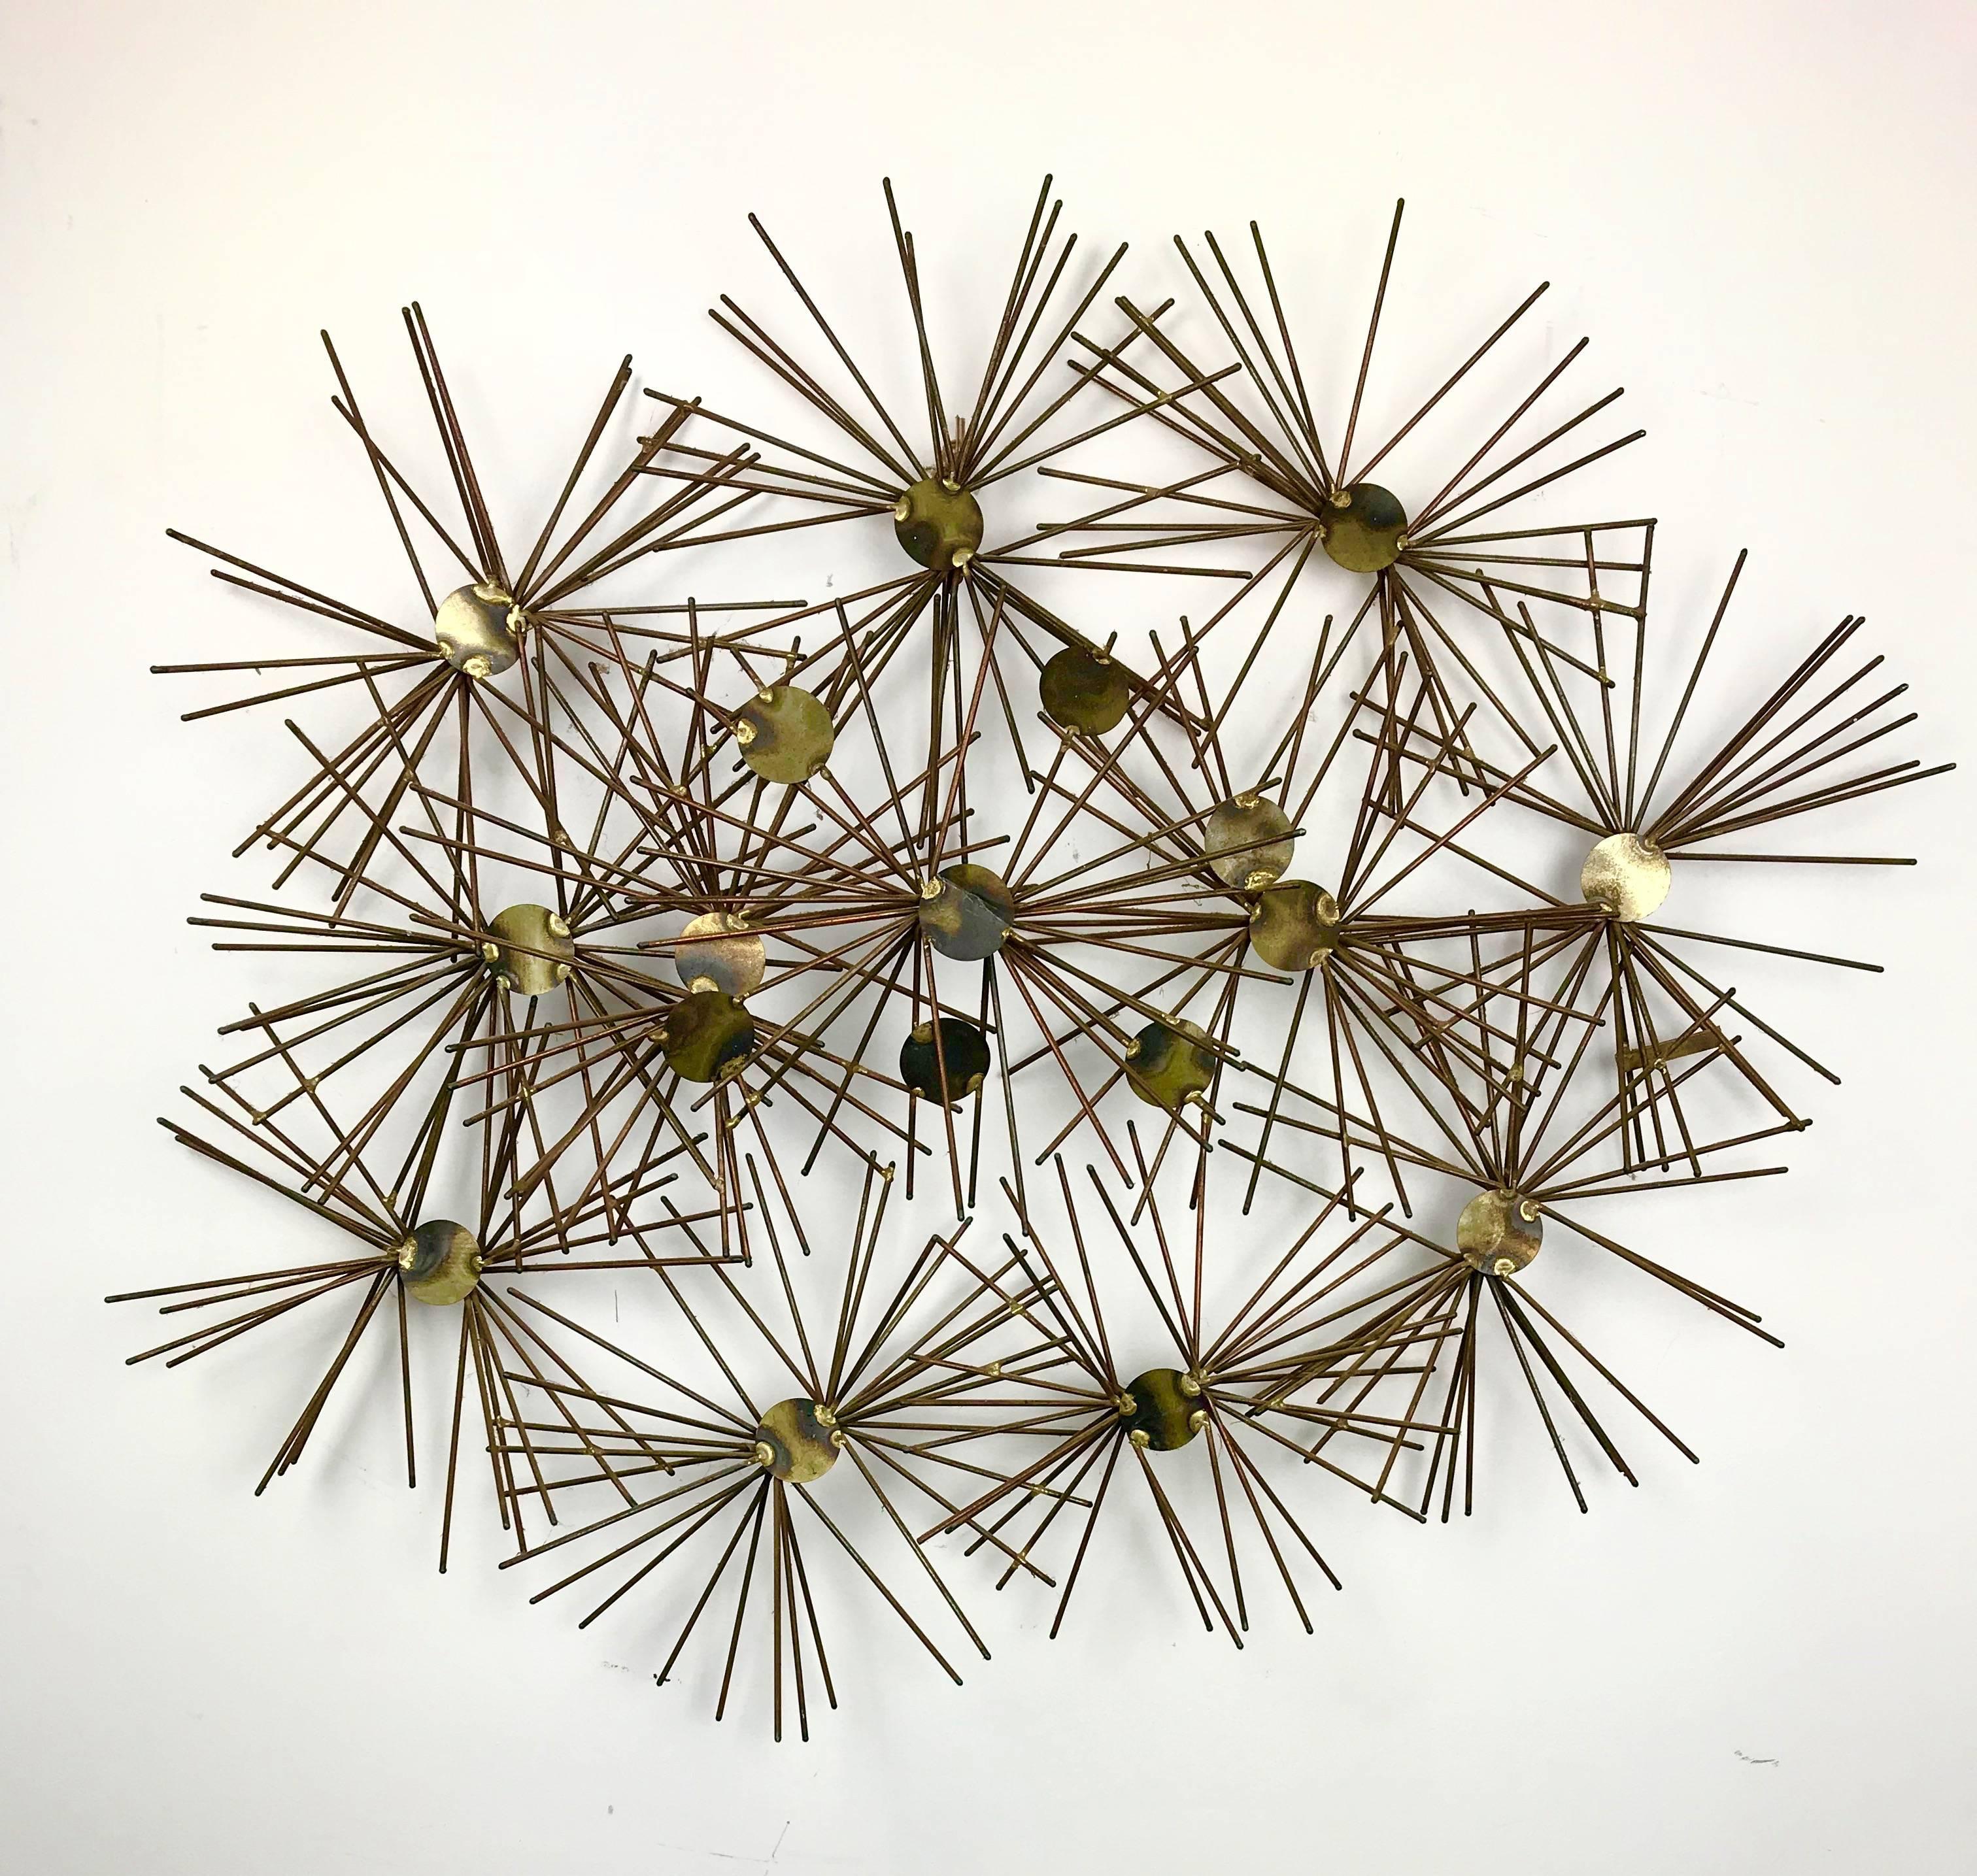 This is a great looking mixed metal (copper and brass) torch welded wall sculpture. Well crafted and with a lot of energy this piece makes a strong statement in any setting.